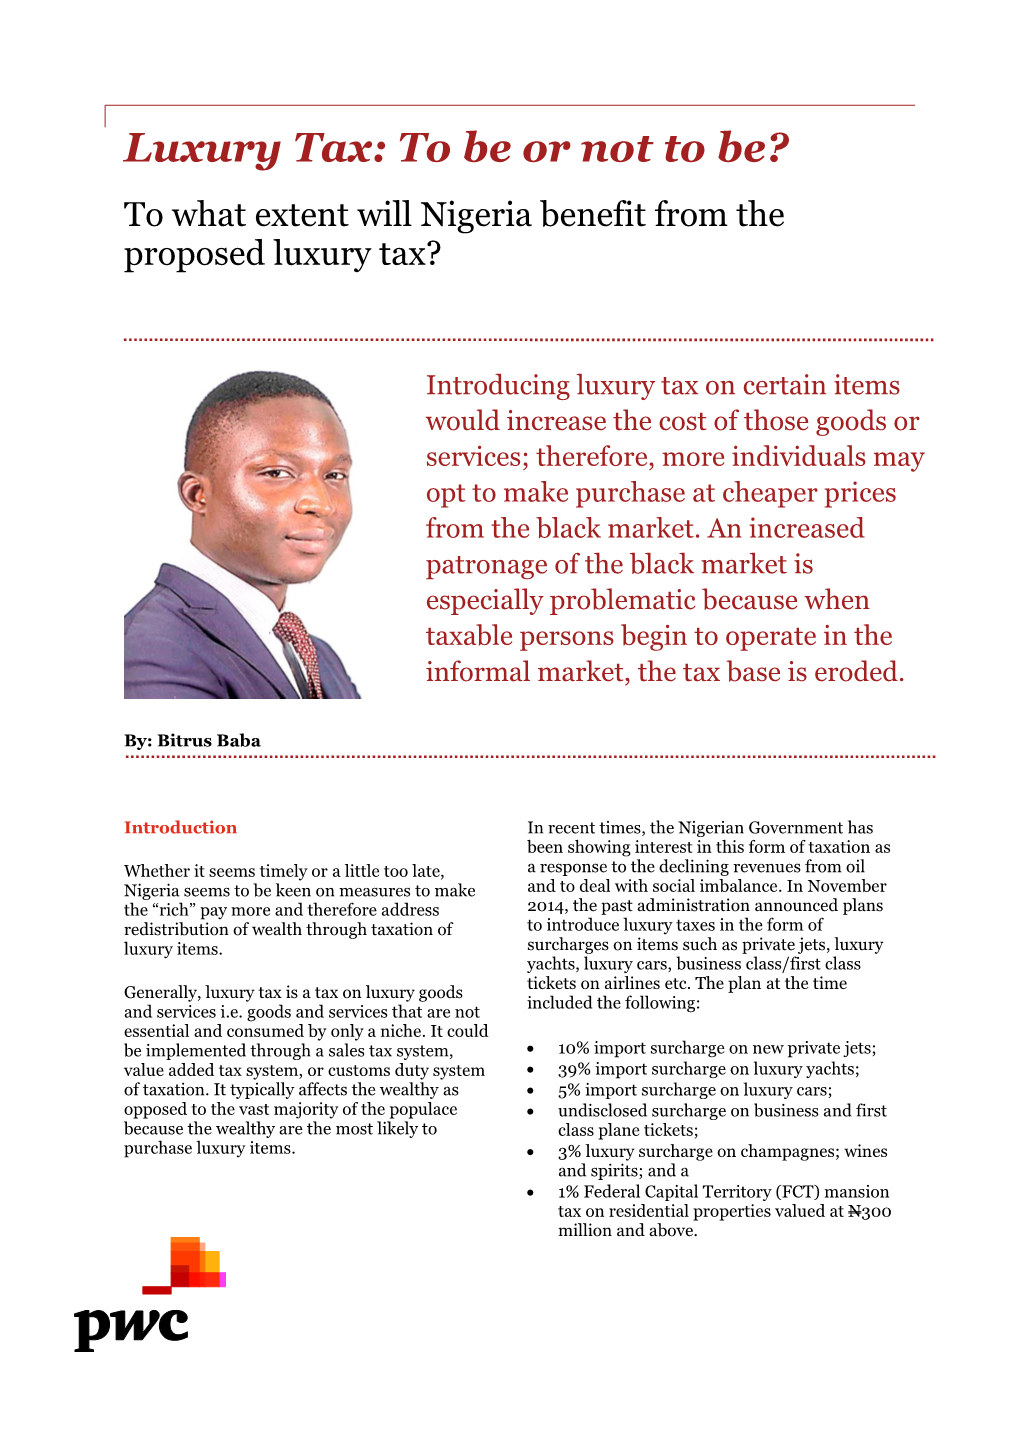 Luxury Tax: to Be Or Not to Be? to What Extent Will Nigeria Benefit from the Proposed Luxury Tax?